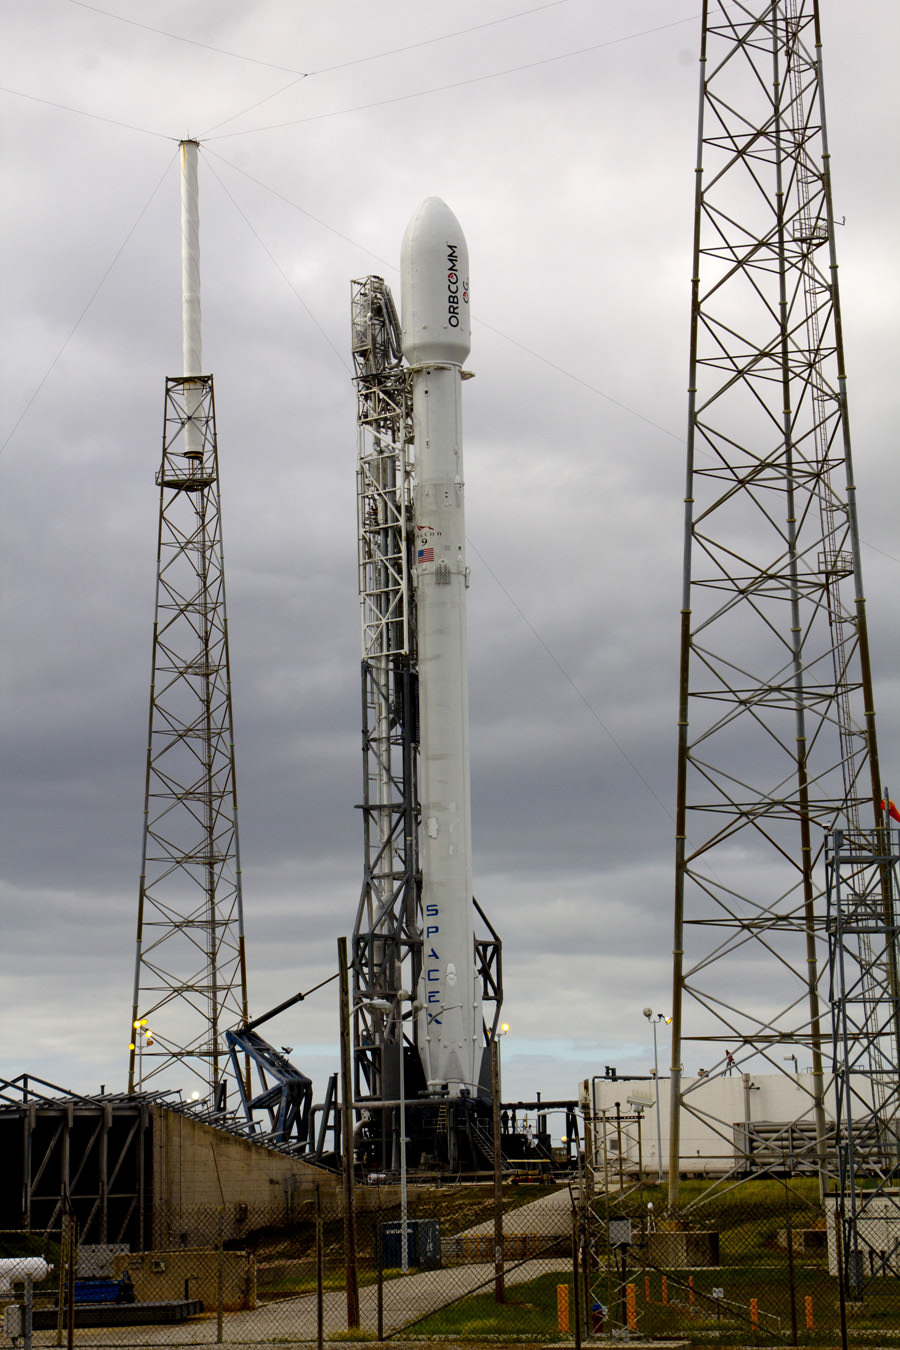 SpaceX Falcon 9 rocket for Orbcomm OG2 launch stands vertical at pad 40 at Cape Canaveral, Fla. for launch on Dec. 20, 2015.  Credit: Jeff Seibert/AmericaSpace